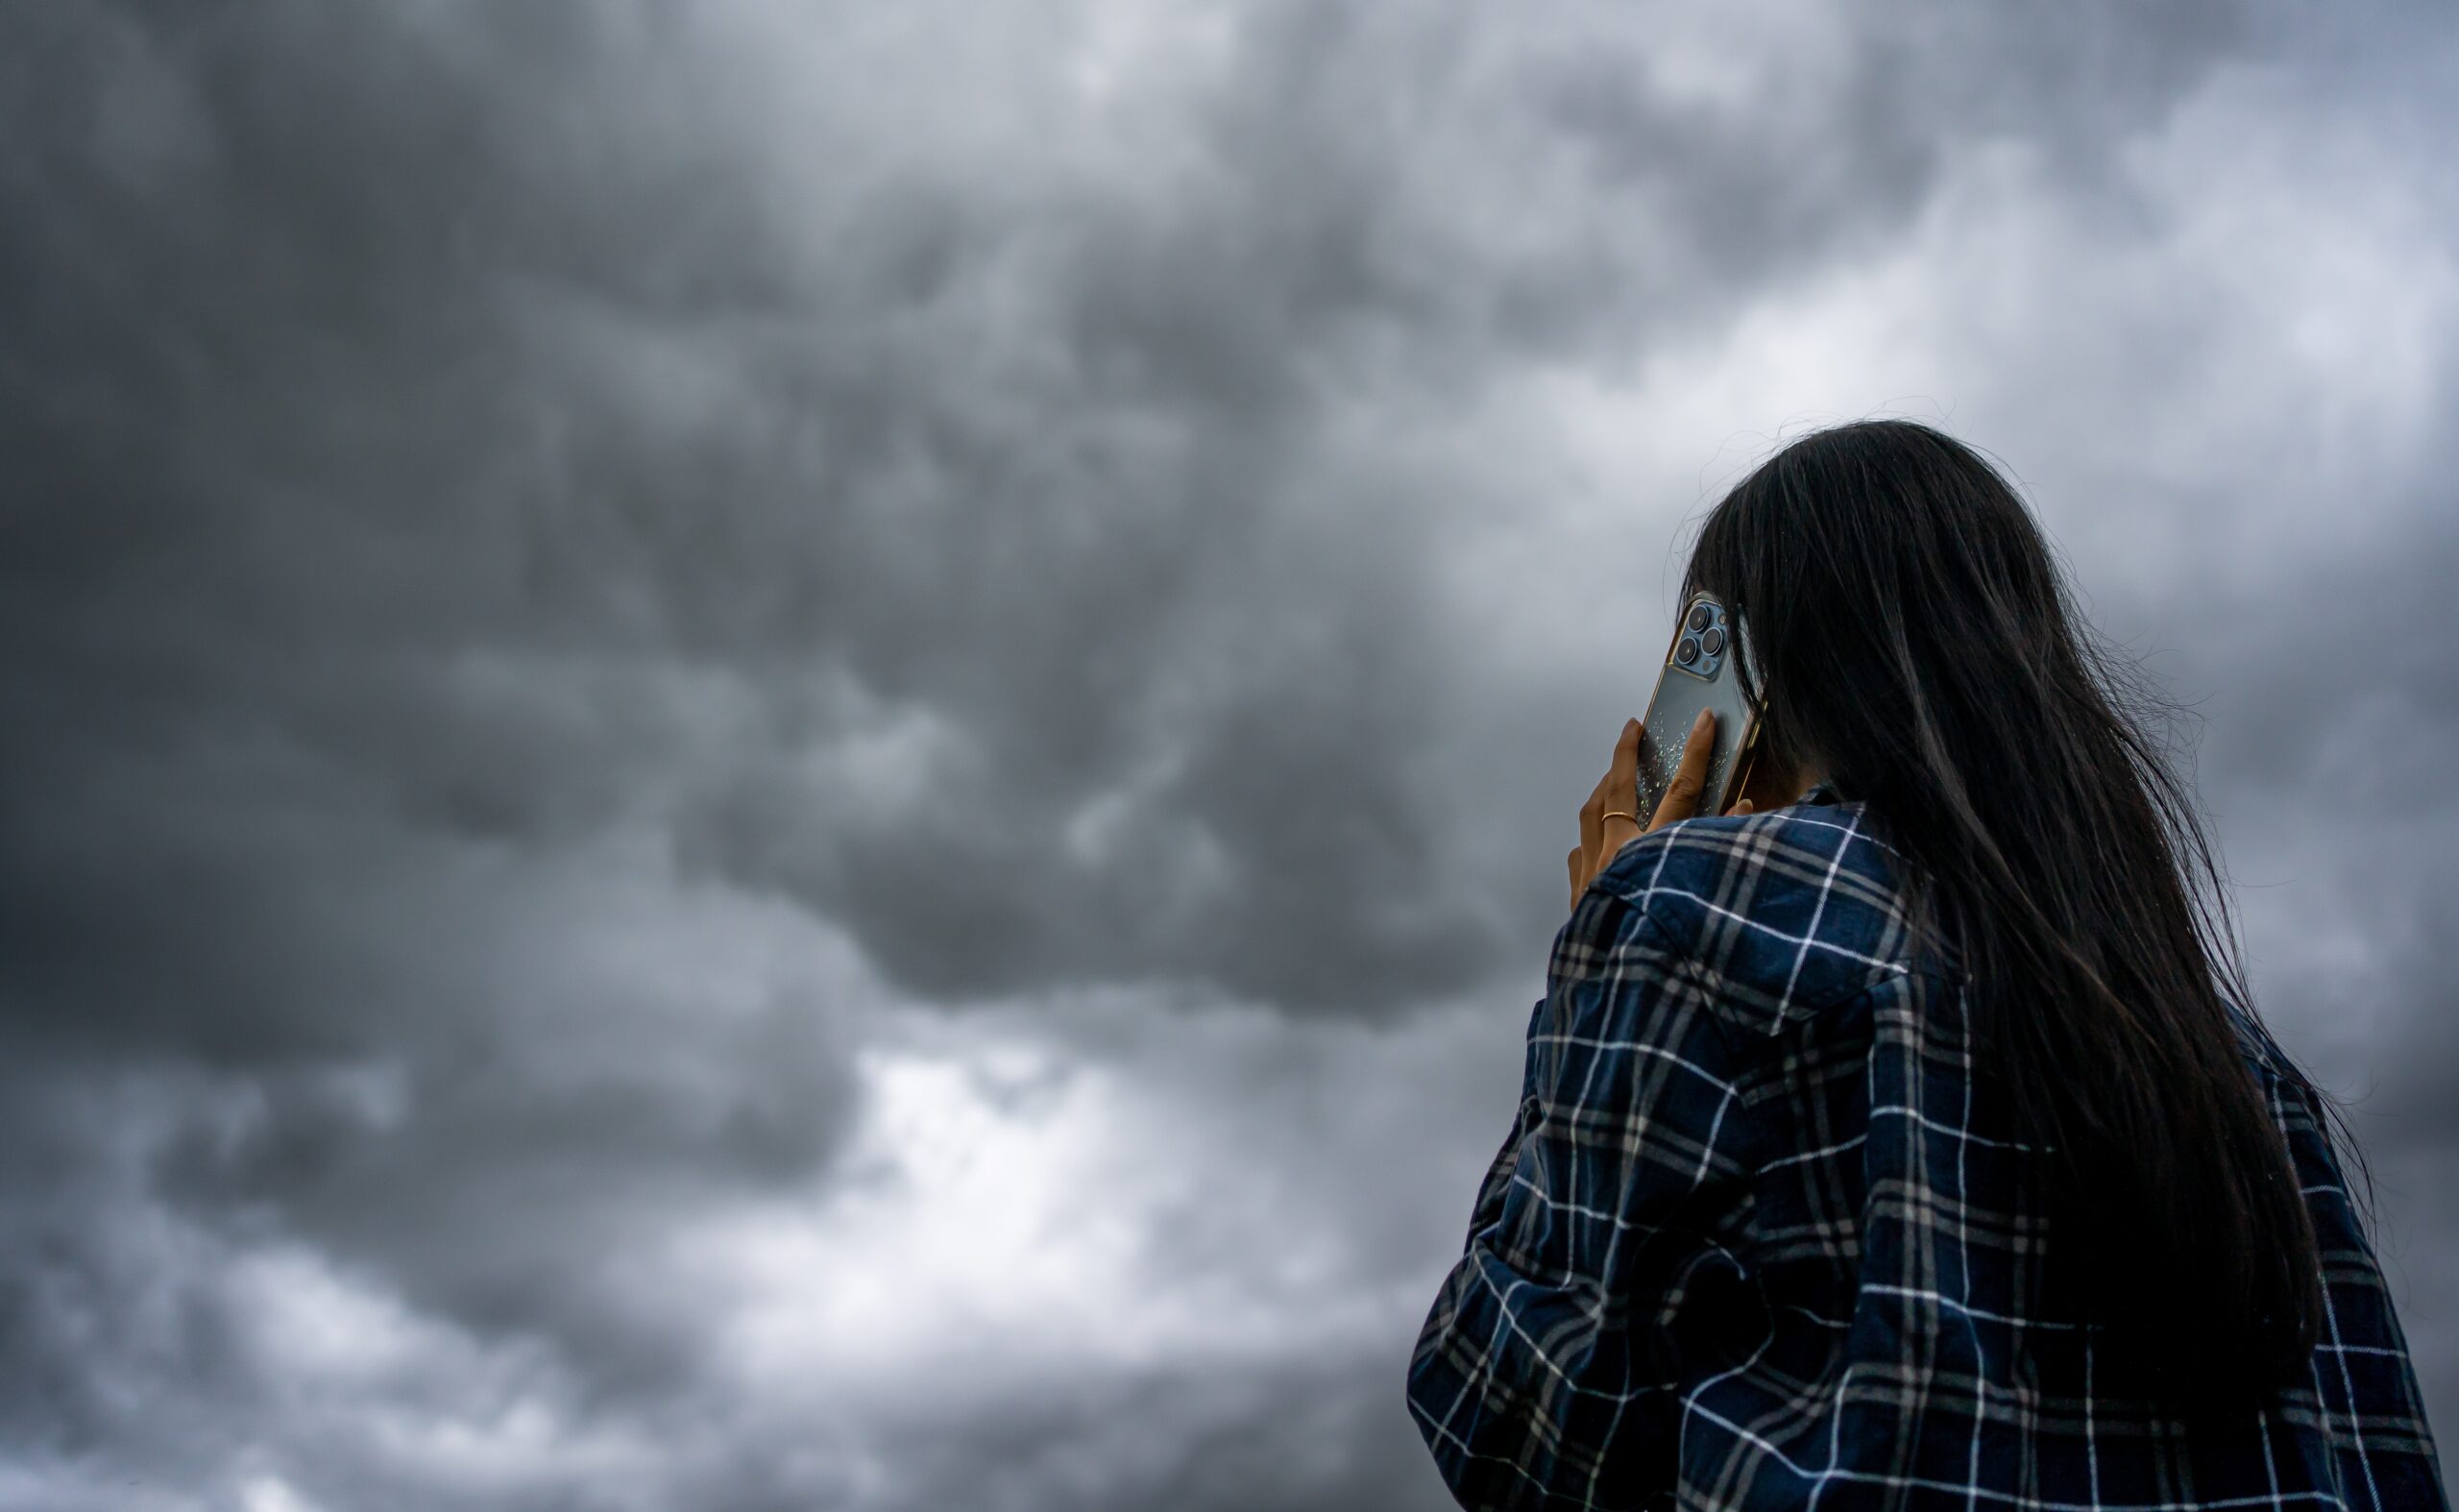 Be Prepared: Important Steps You Can Take to Stay Connected During a Storm